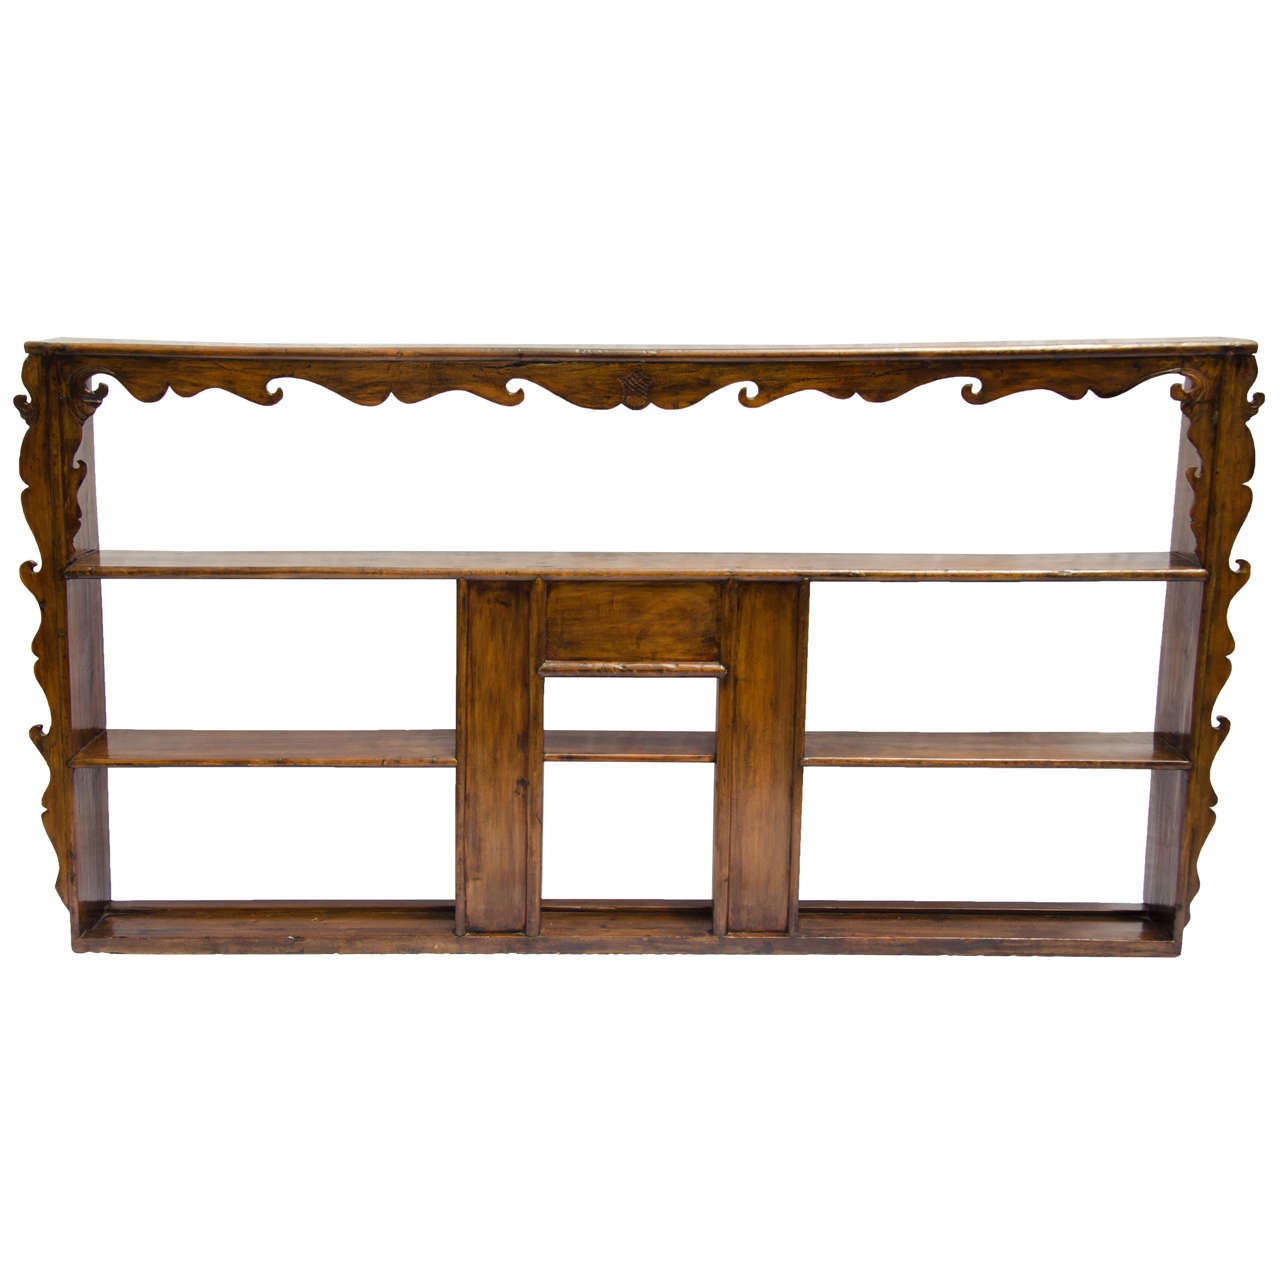 Late 19thC. Indonesian Dutch Colonial Anglo Hanging Display Shelf  For Sale